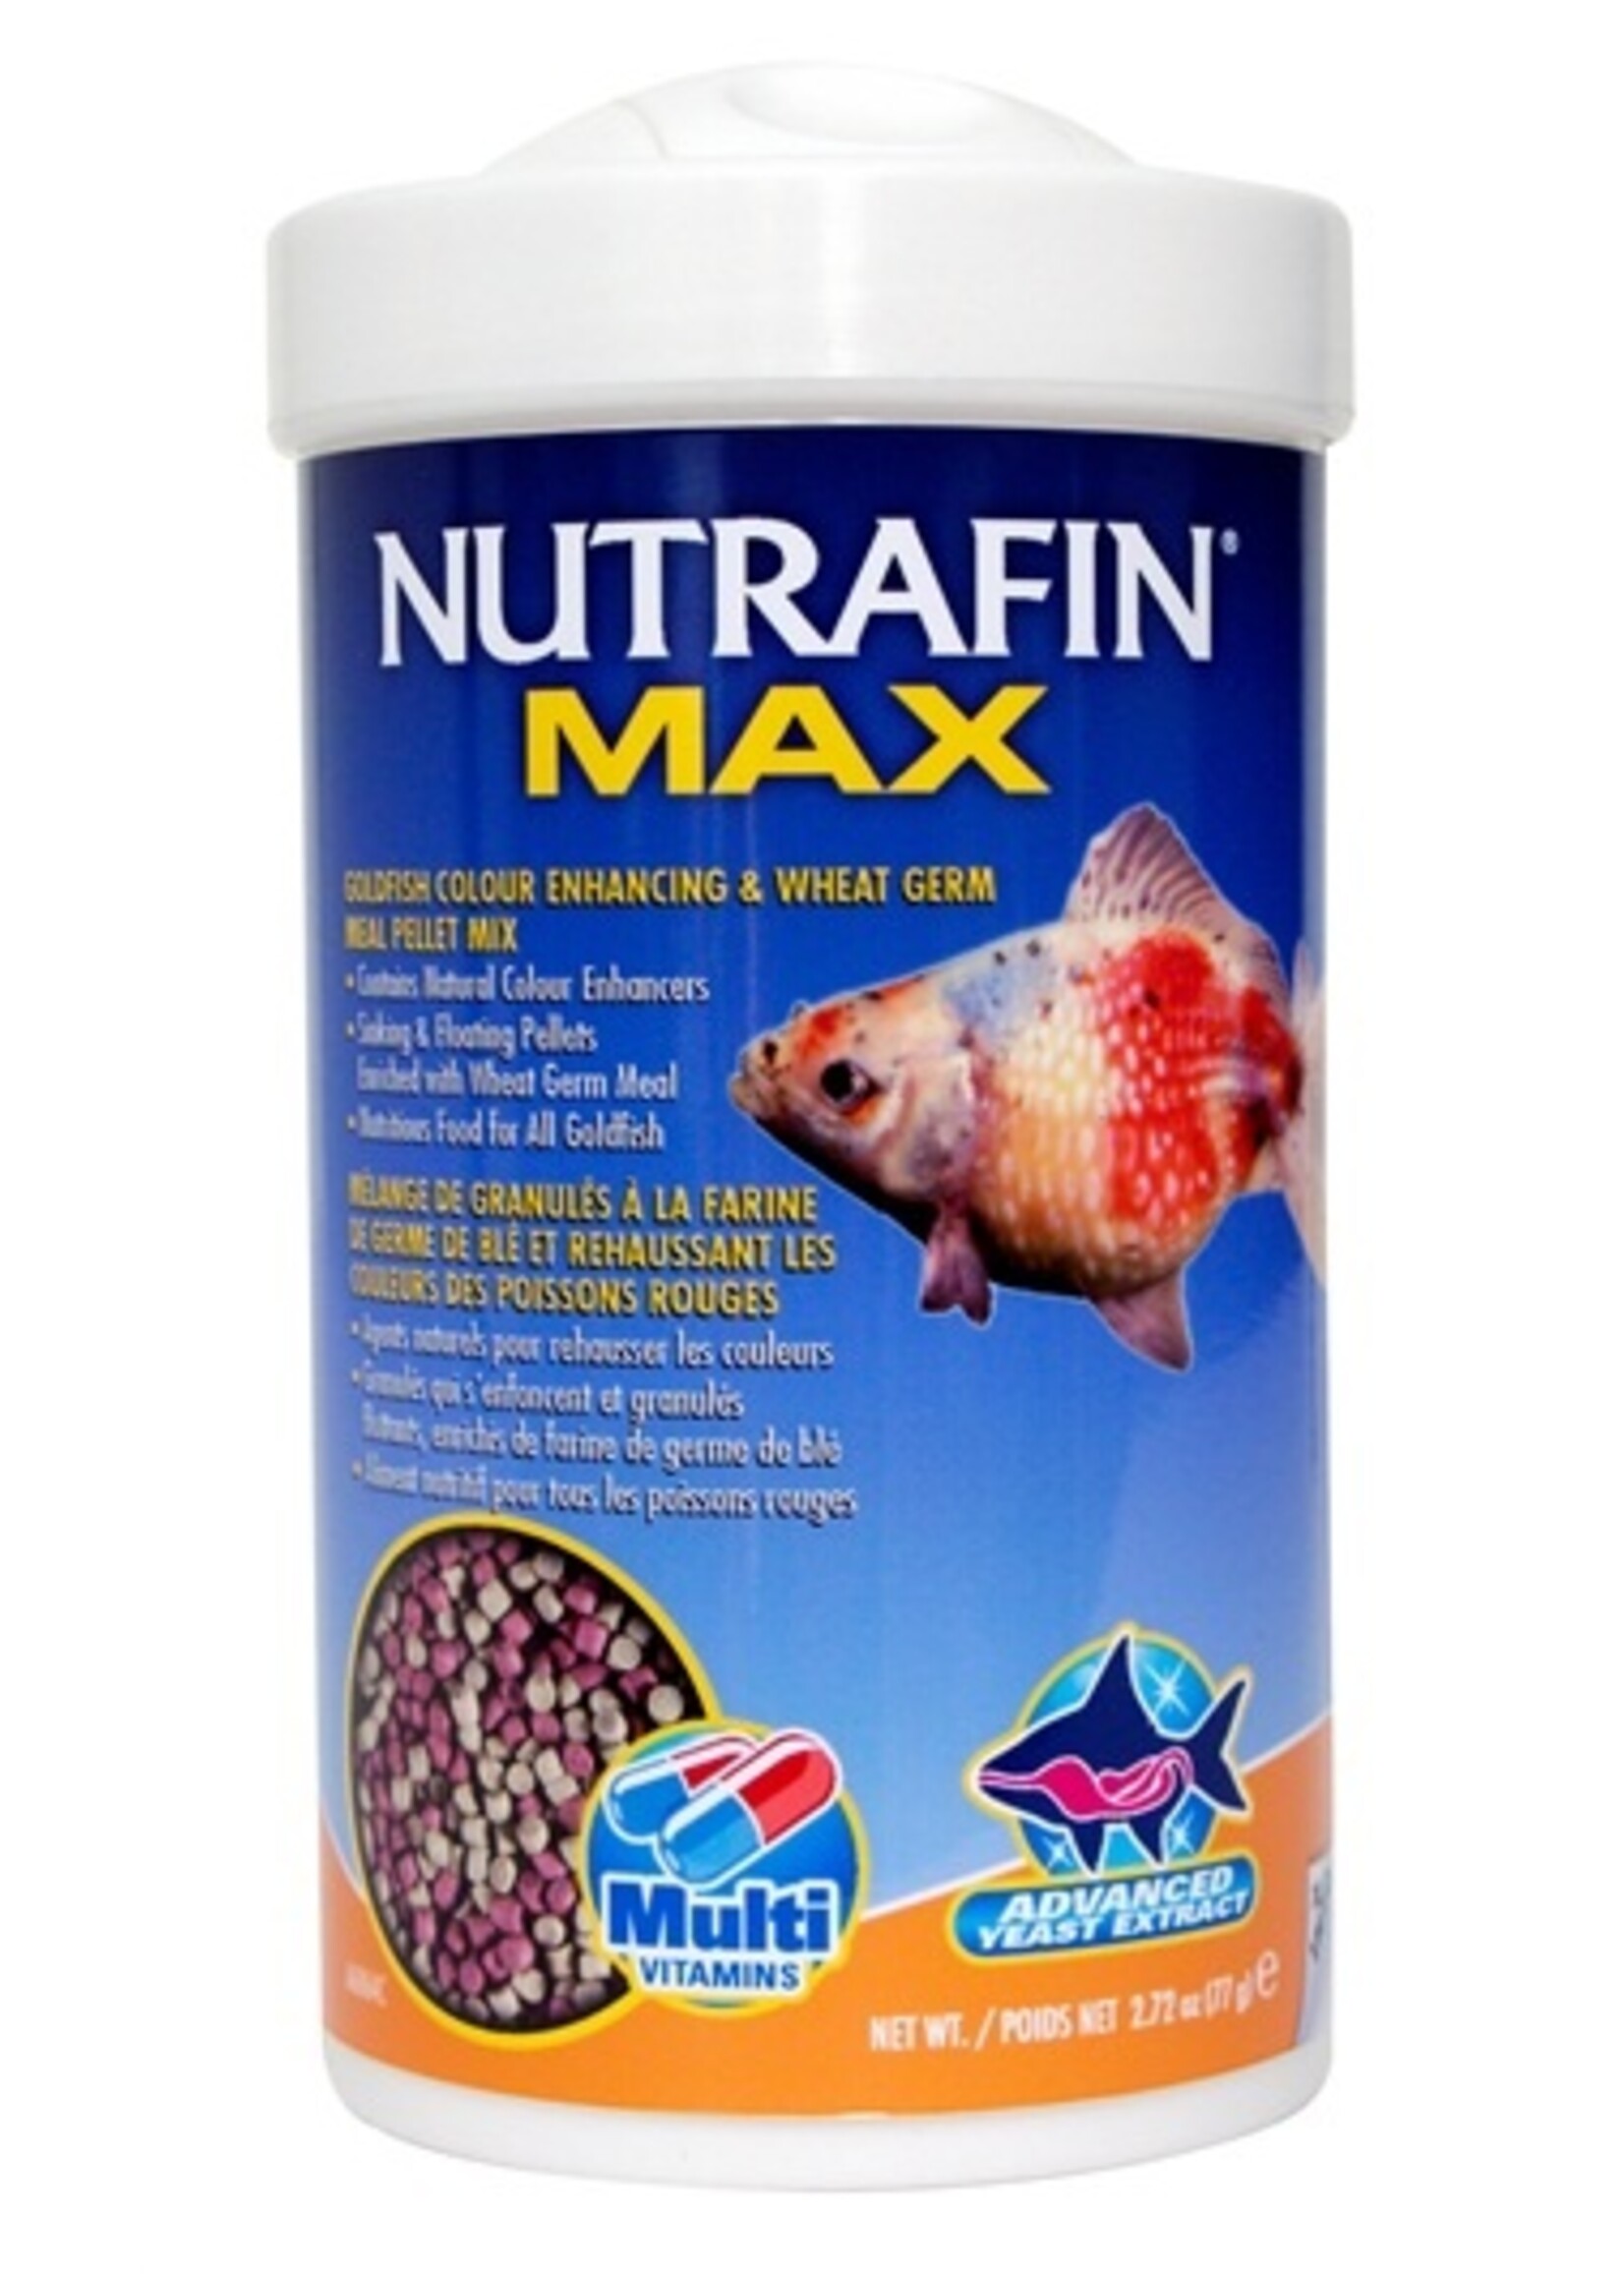 Nutrafin Nutrafin Max Goldfish Colour Enhancing & Wheat Germ Meal Pellet Mix